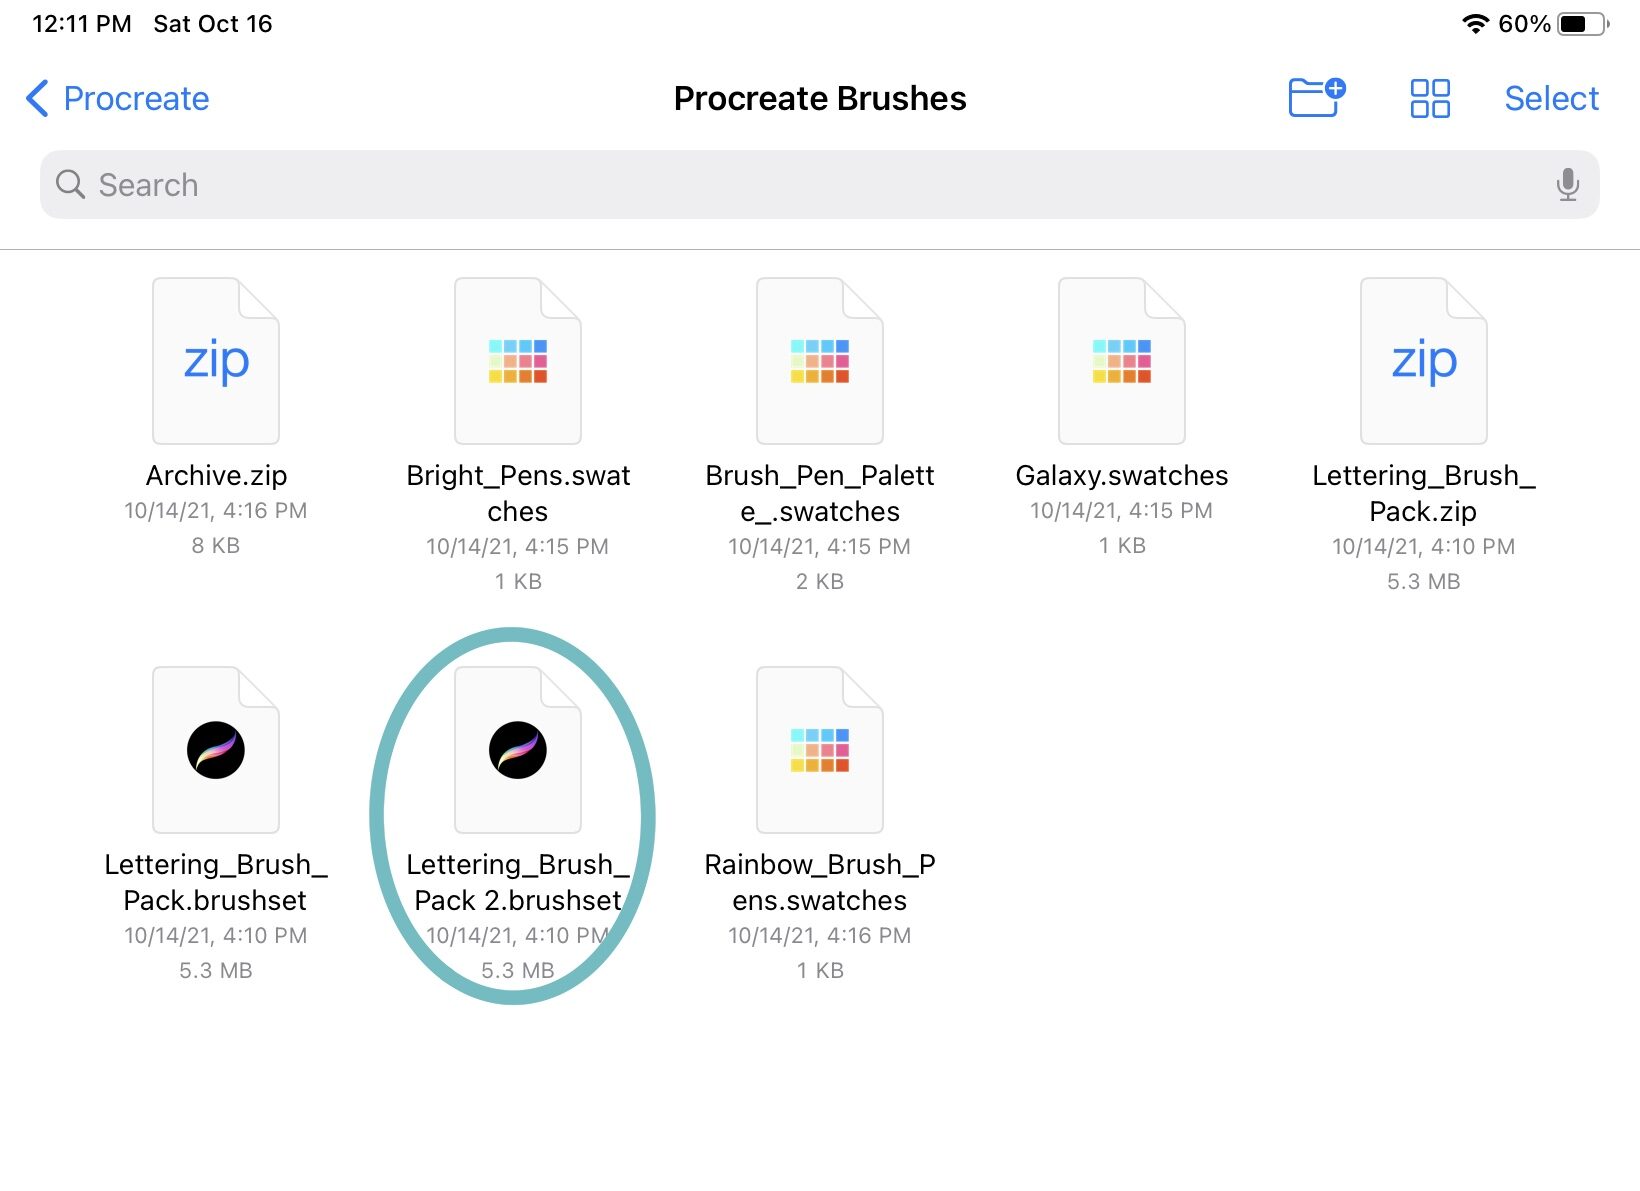 How to Import Brushes into Procreate | Importing Brushes to Procreate | How to Install Procreate Brushes | How to Import Brushes to Procreate